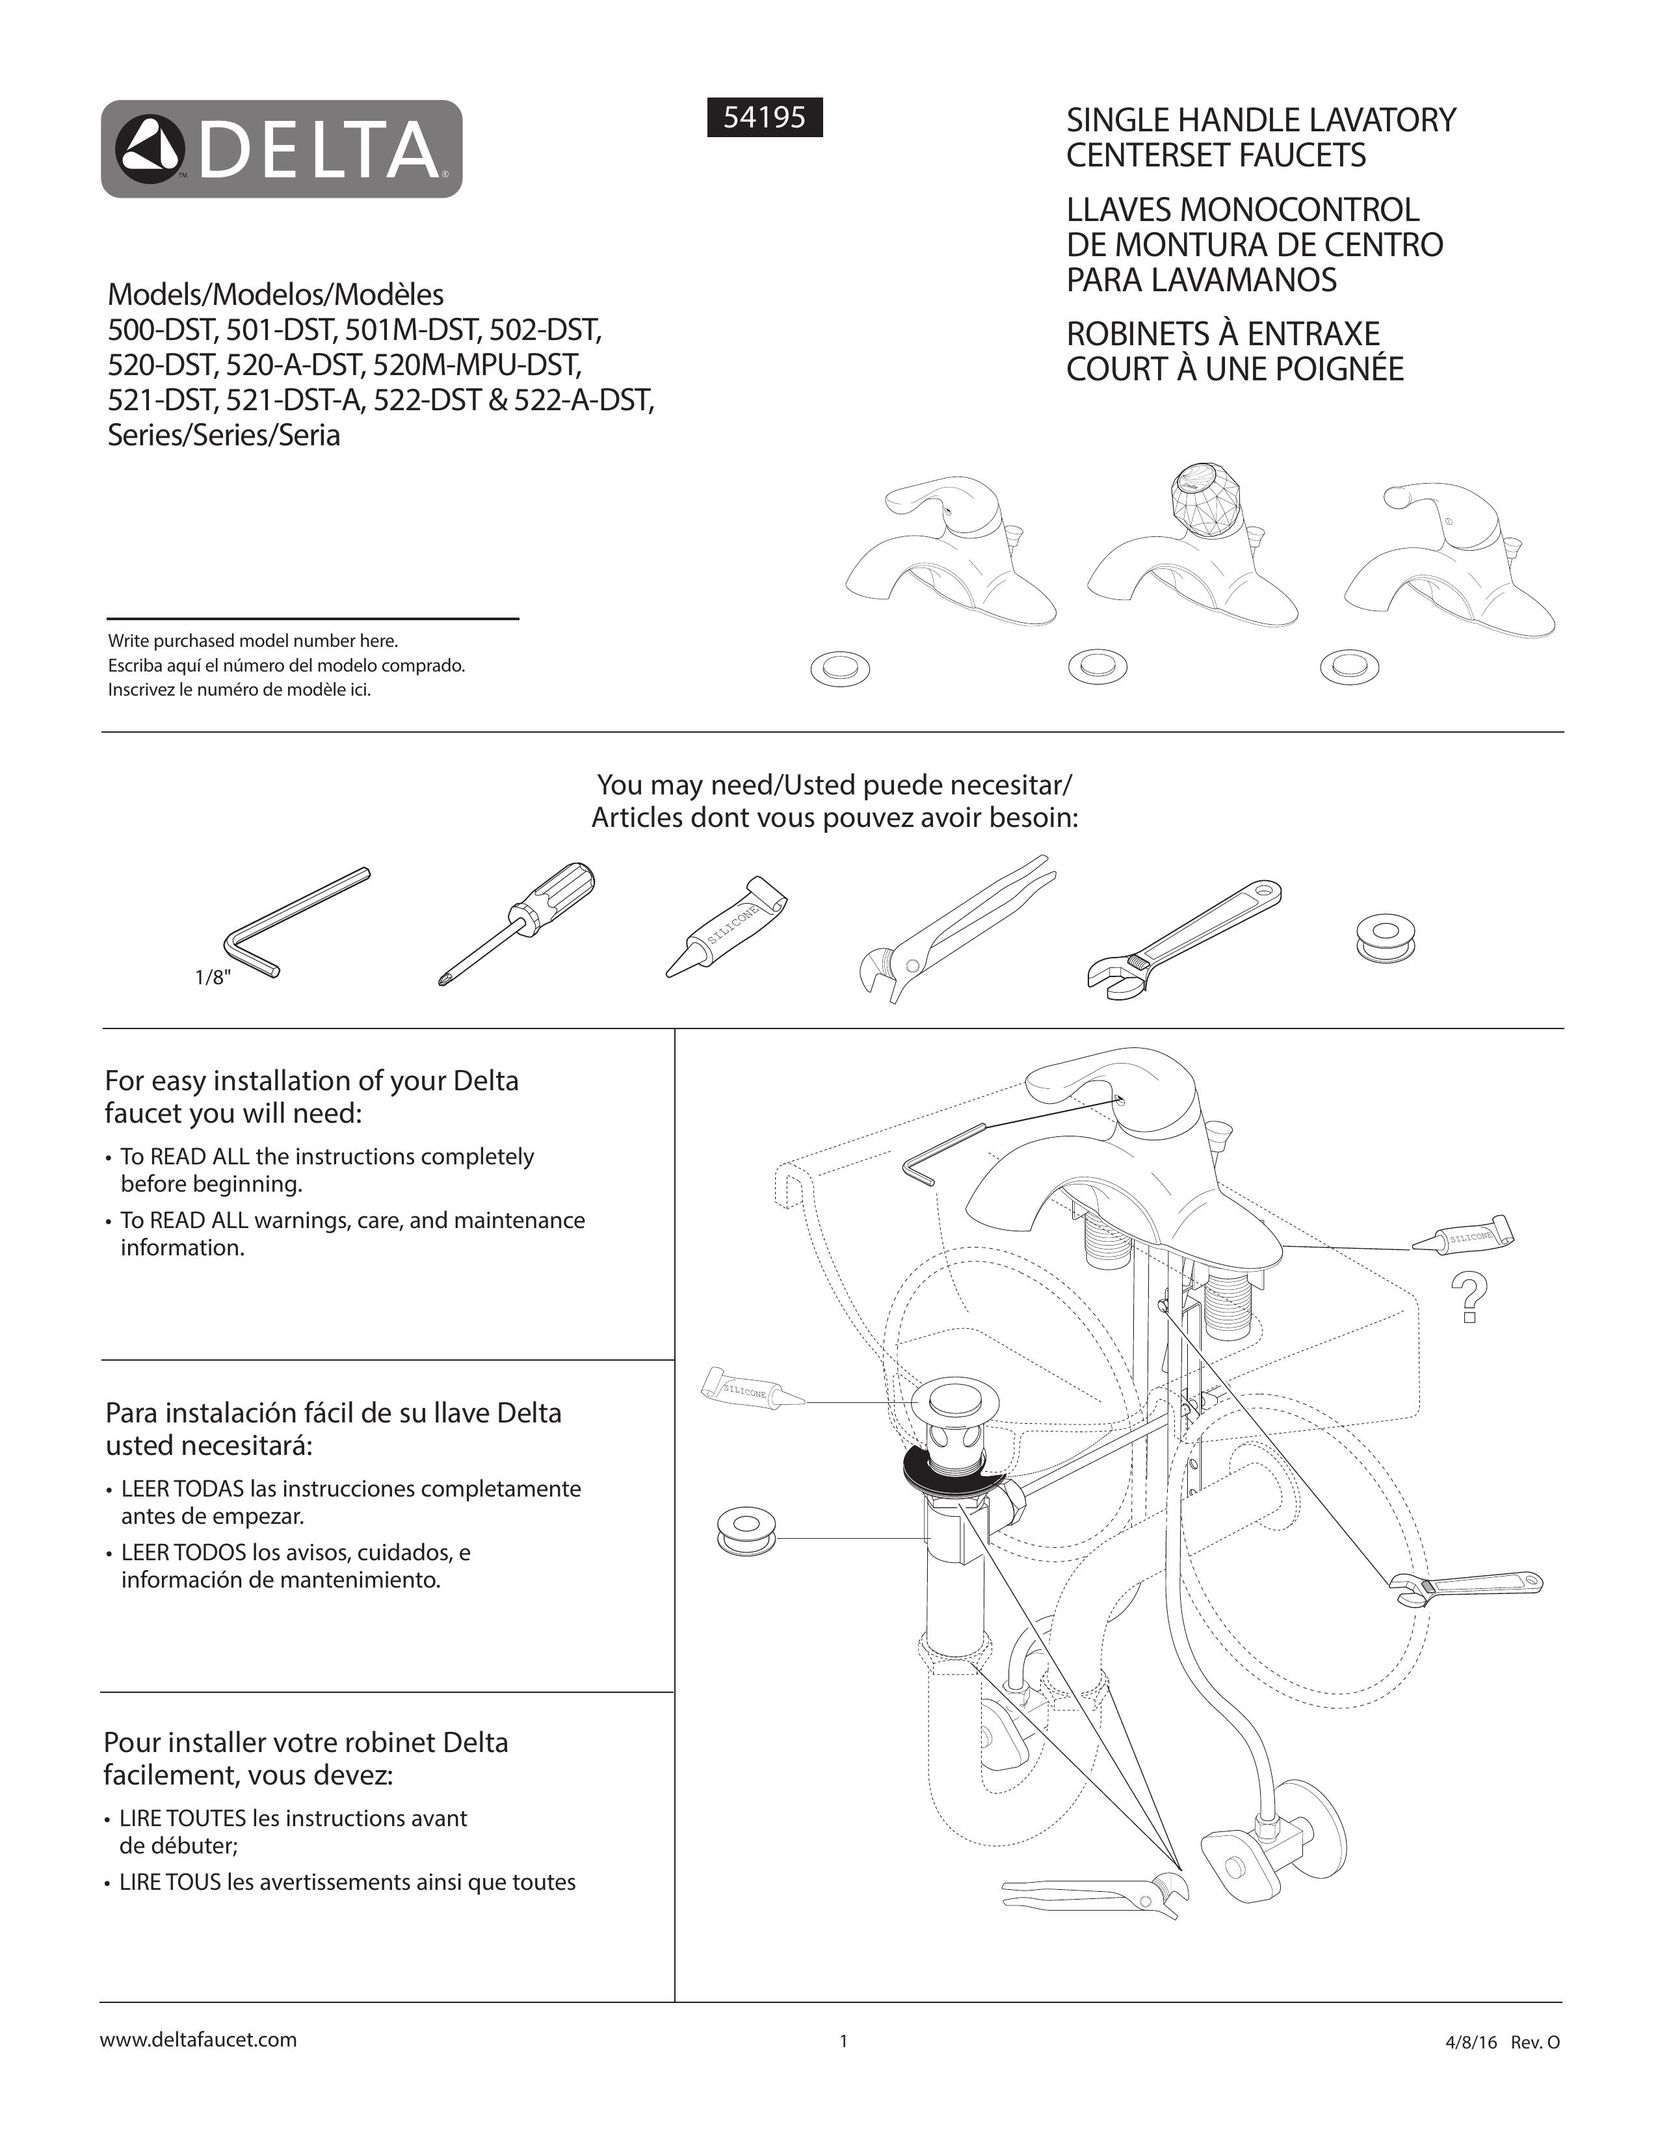 Delta Faucet 520-PPU-DST Plumbing Product User Manual